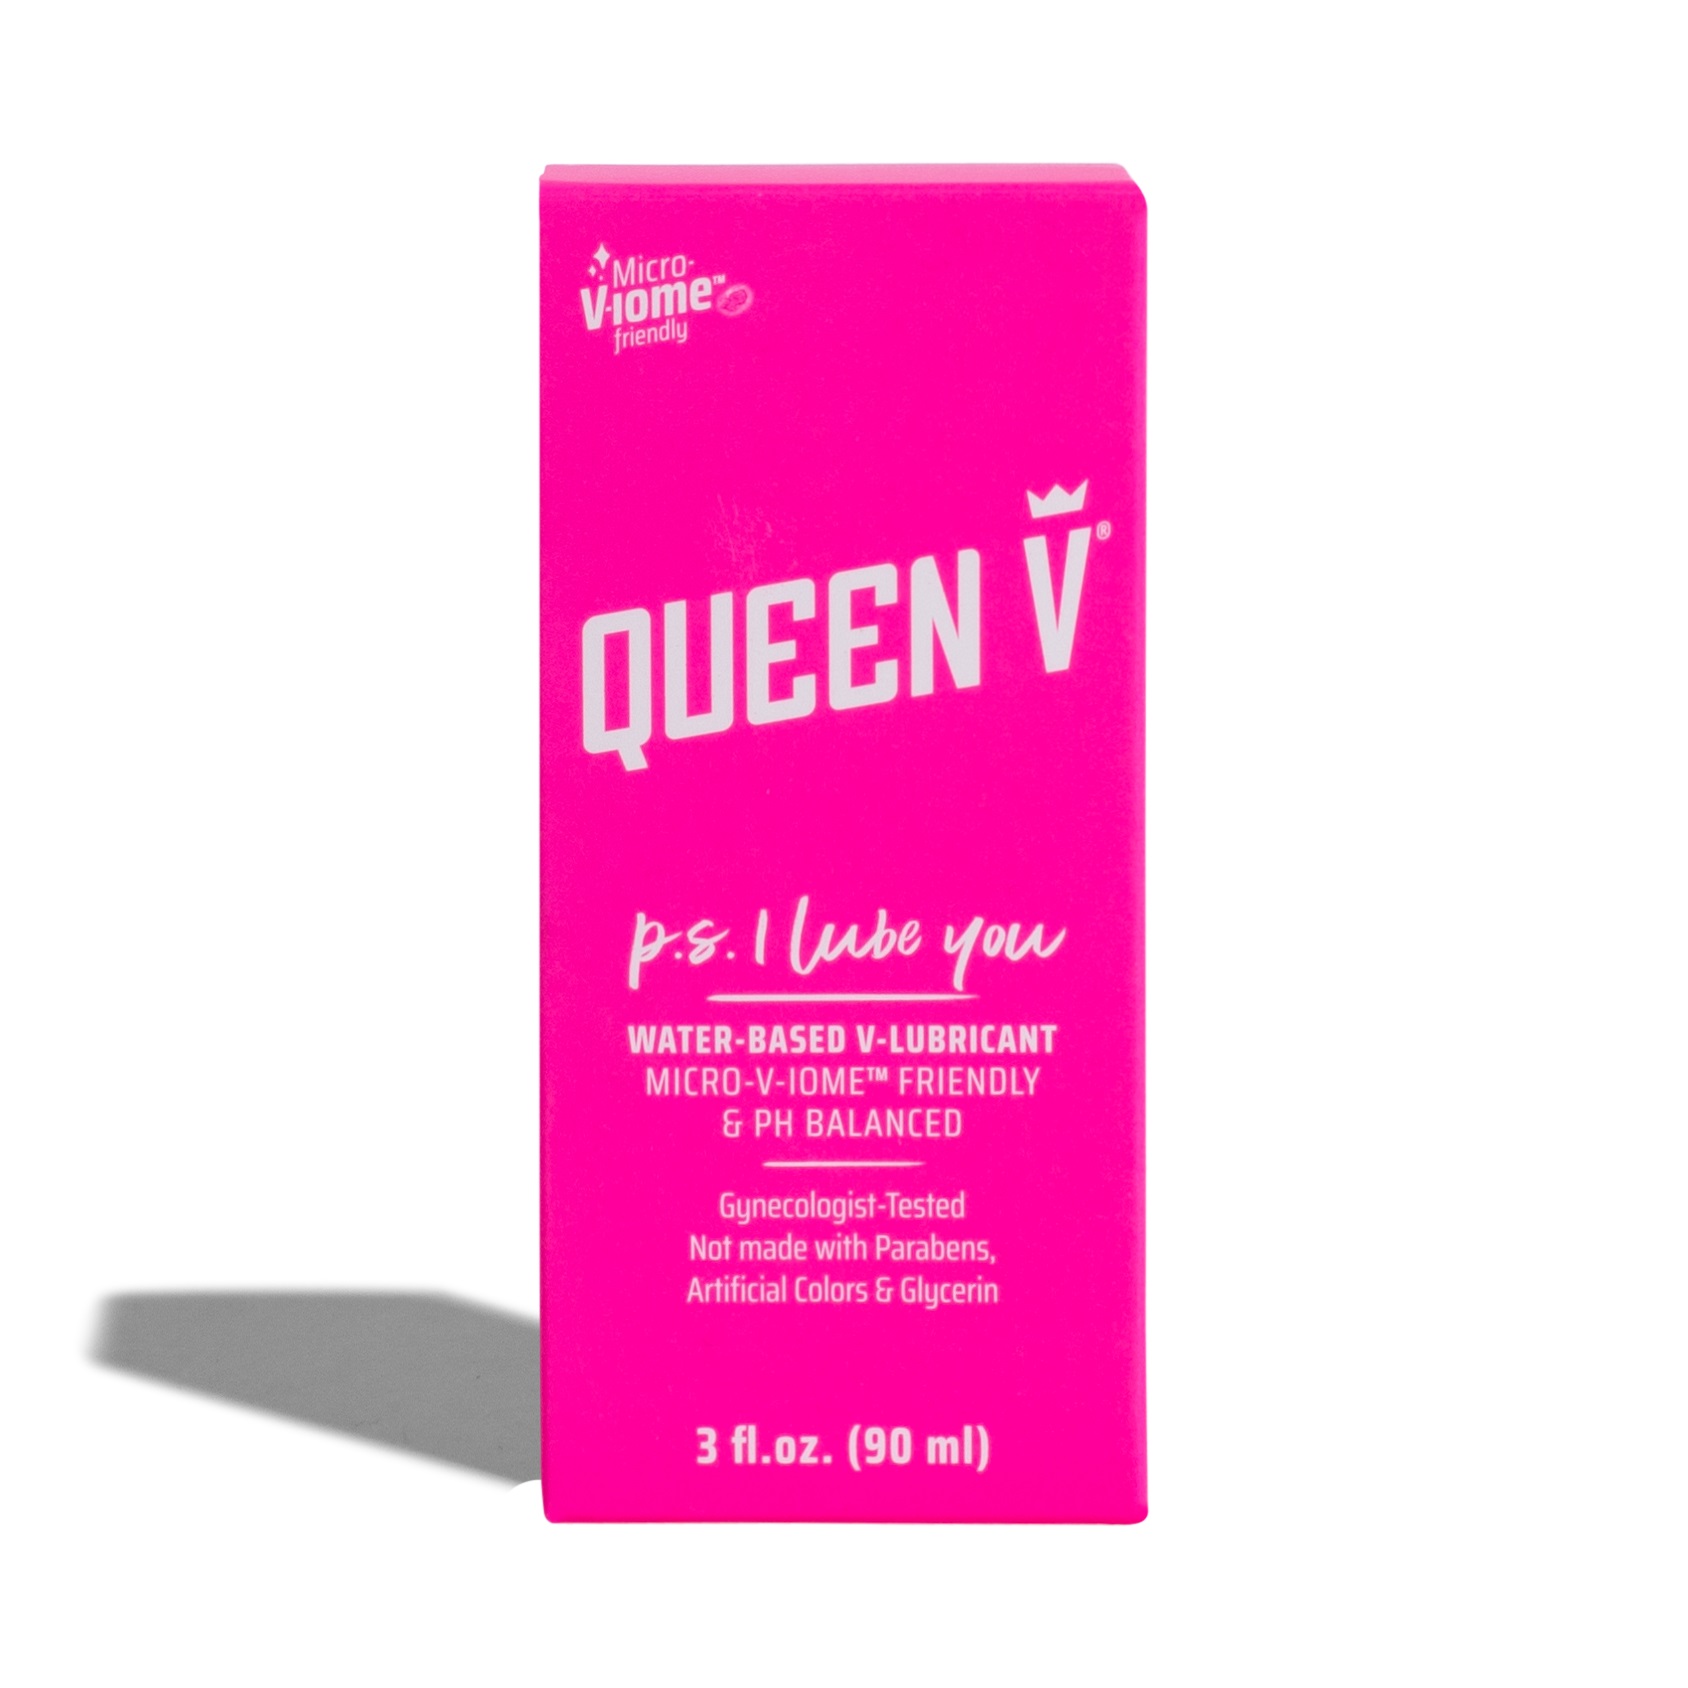 QUEEN V ps I Lube You  Intimate Lube